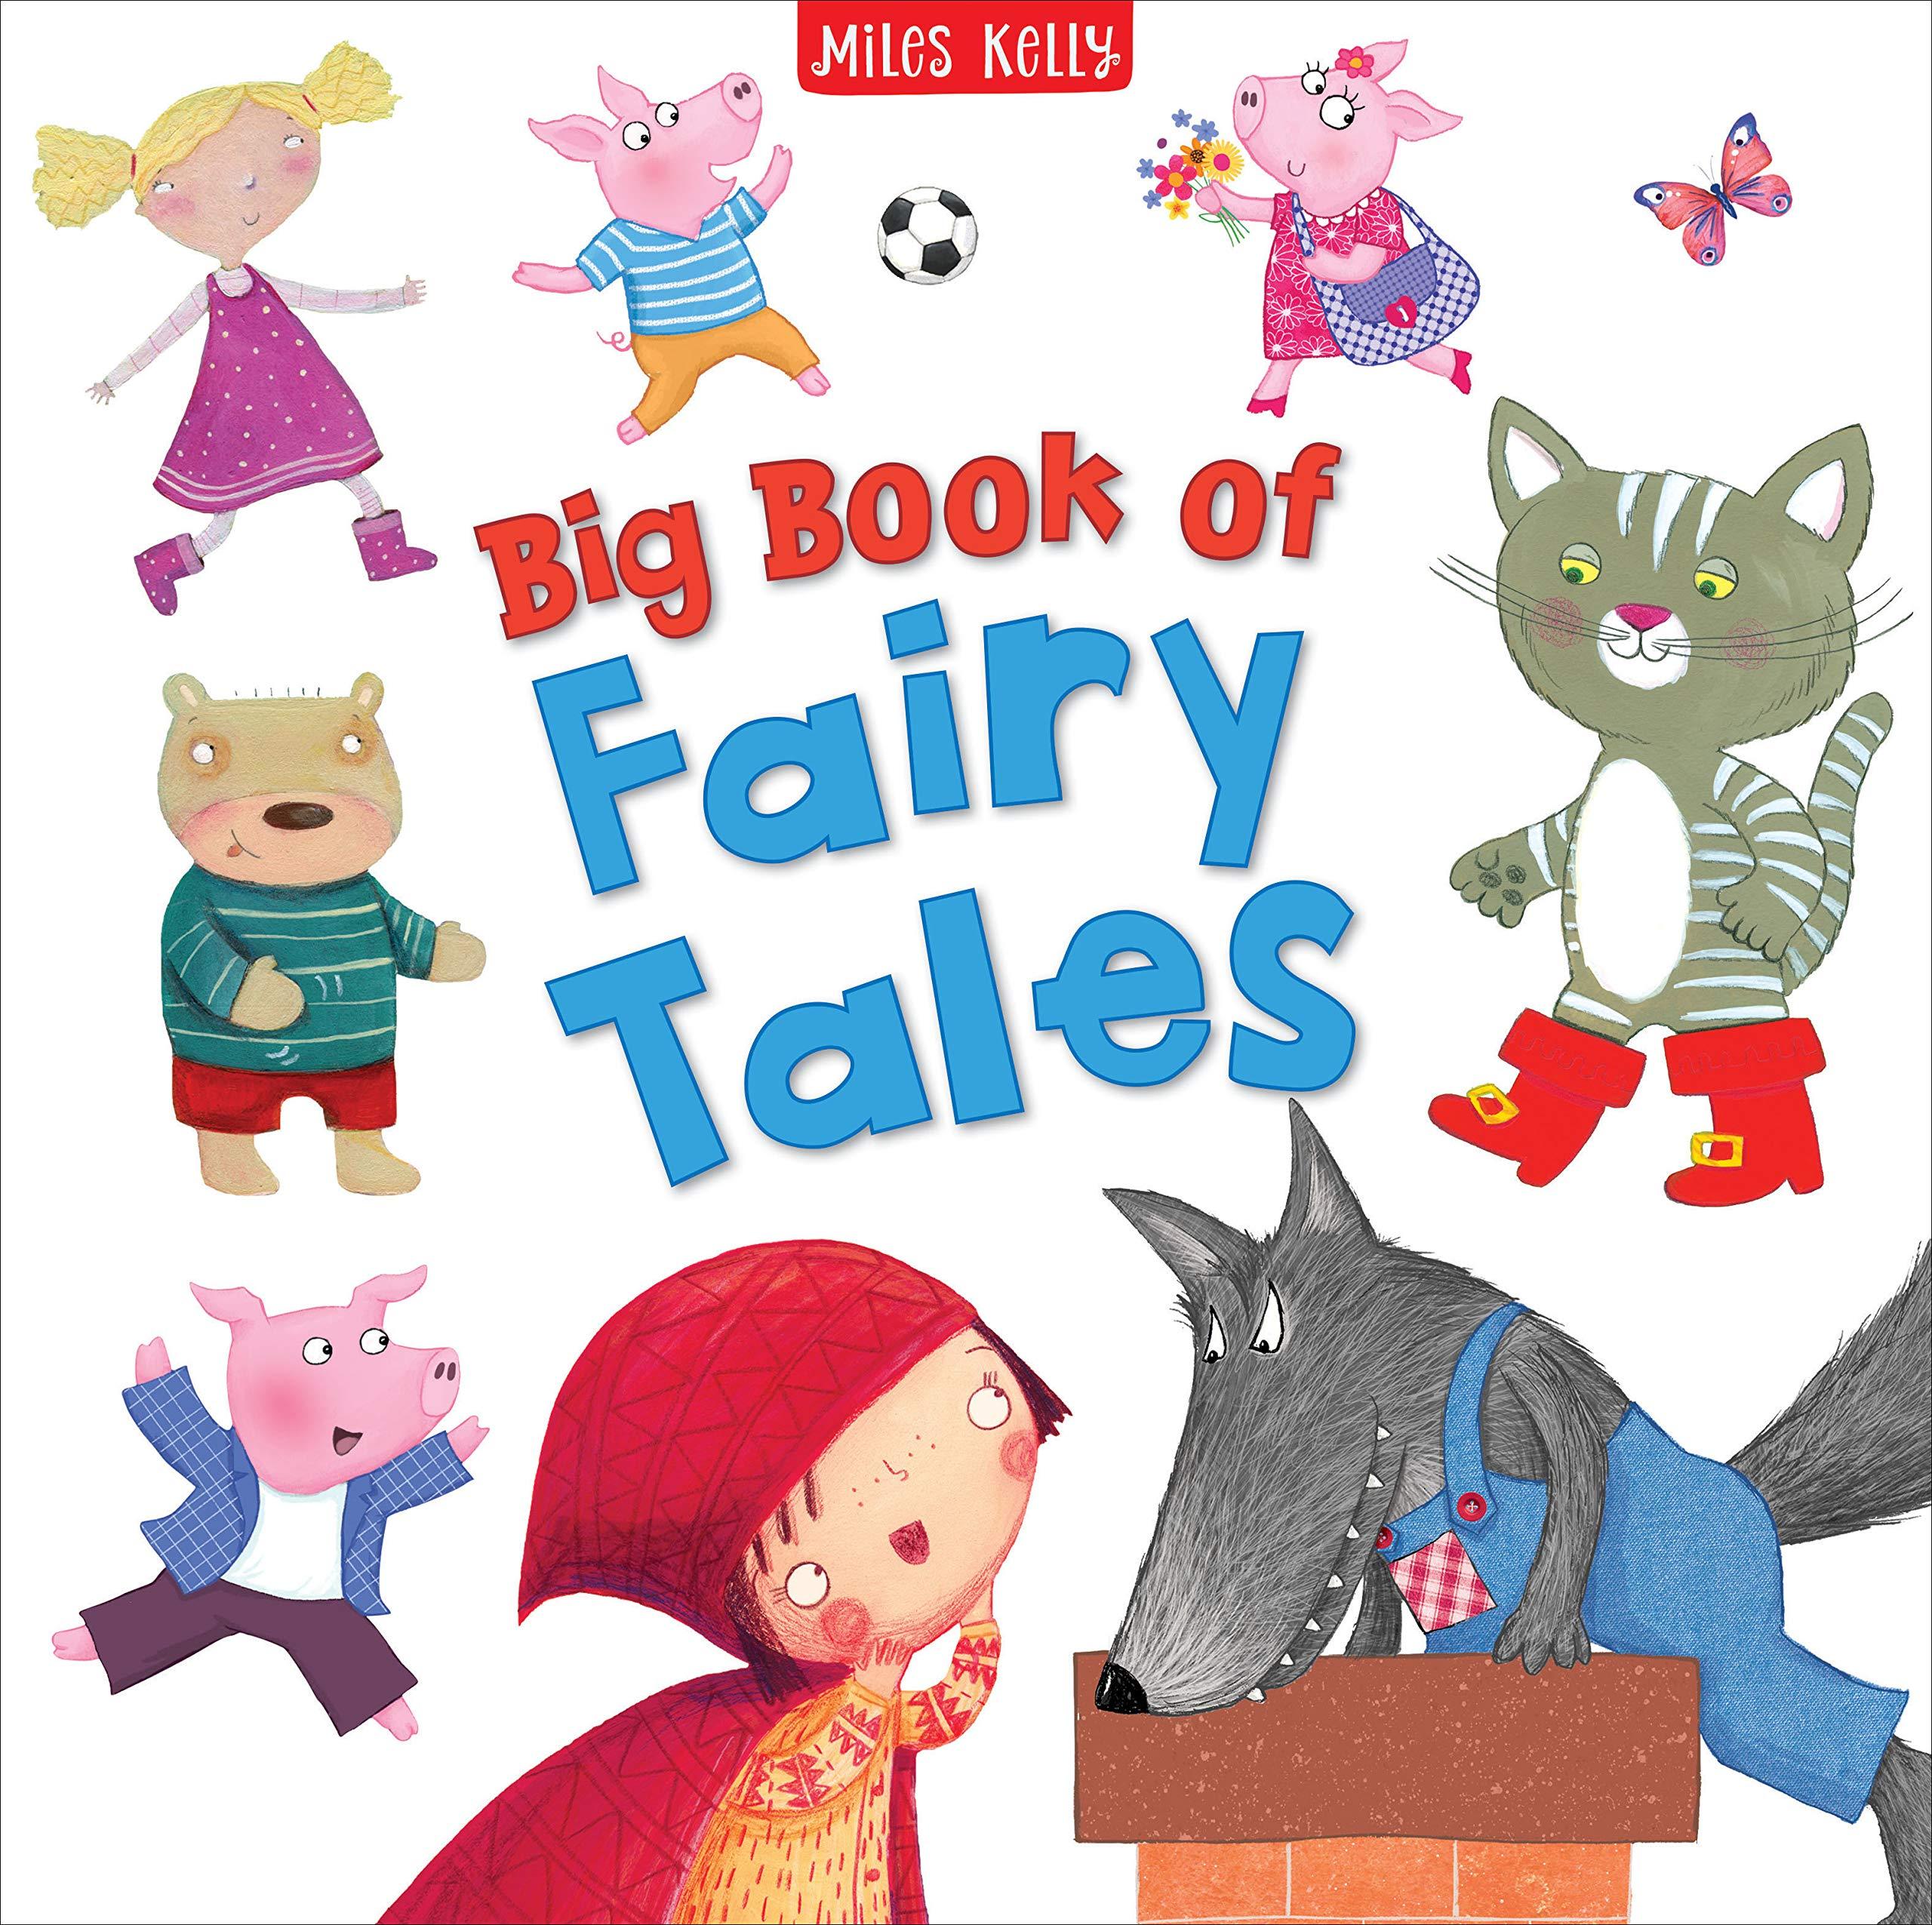 Big Book of Fairy Tales-4 Classic Stories